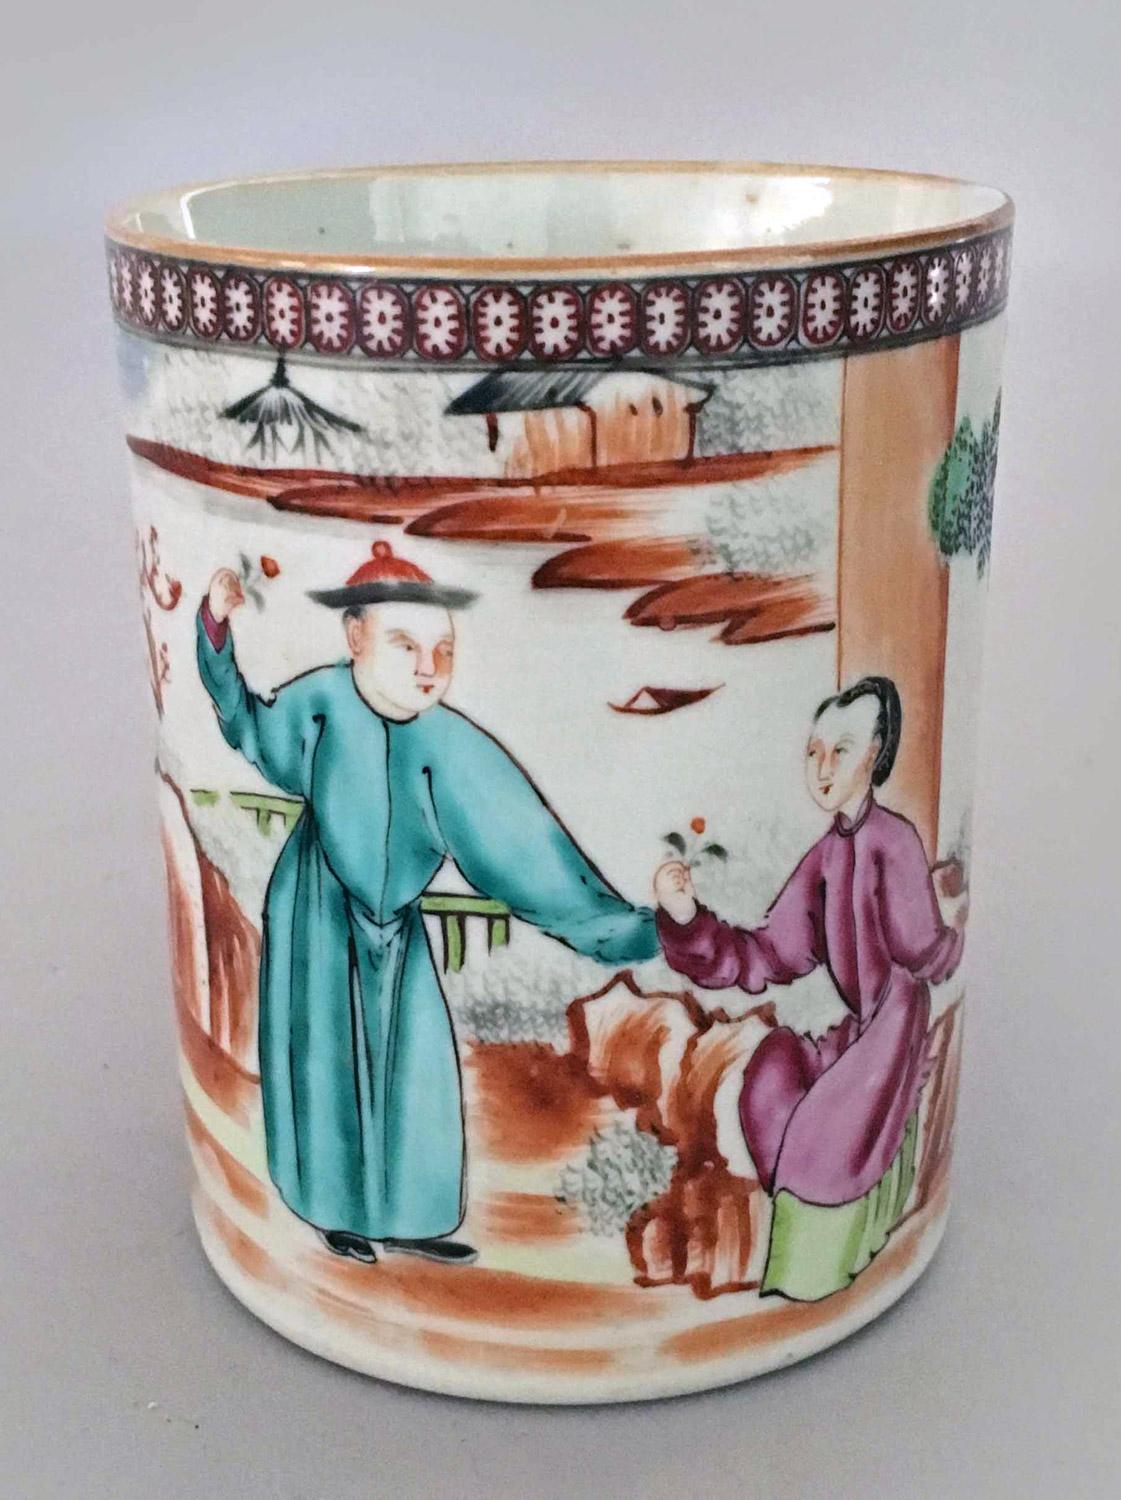 18th century Chinese Qianlong period porcelain famille rose mug depicting four figures, trees, rockery and a diaper border at the top edge of oval patterns. A turquoise-robed gentleman is presenting his lady clothed in pink and green with flowers.